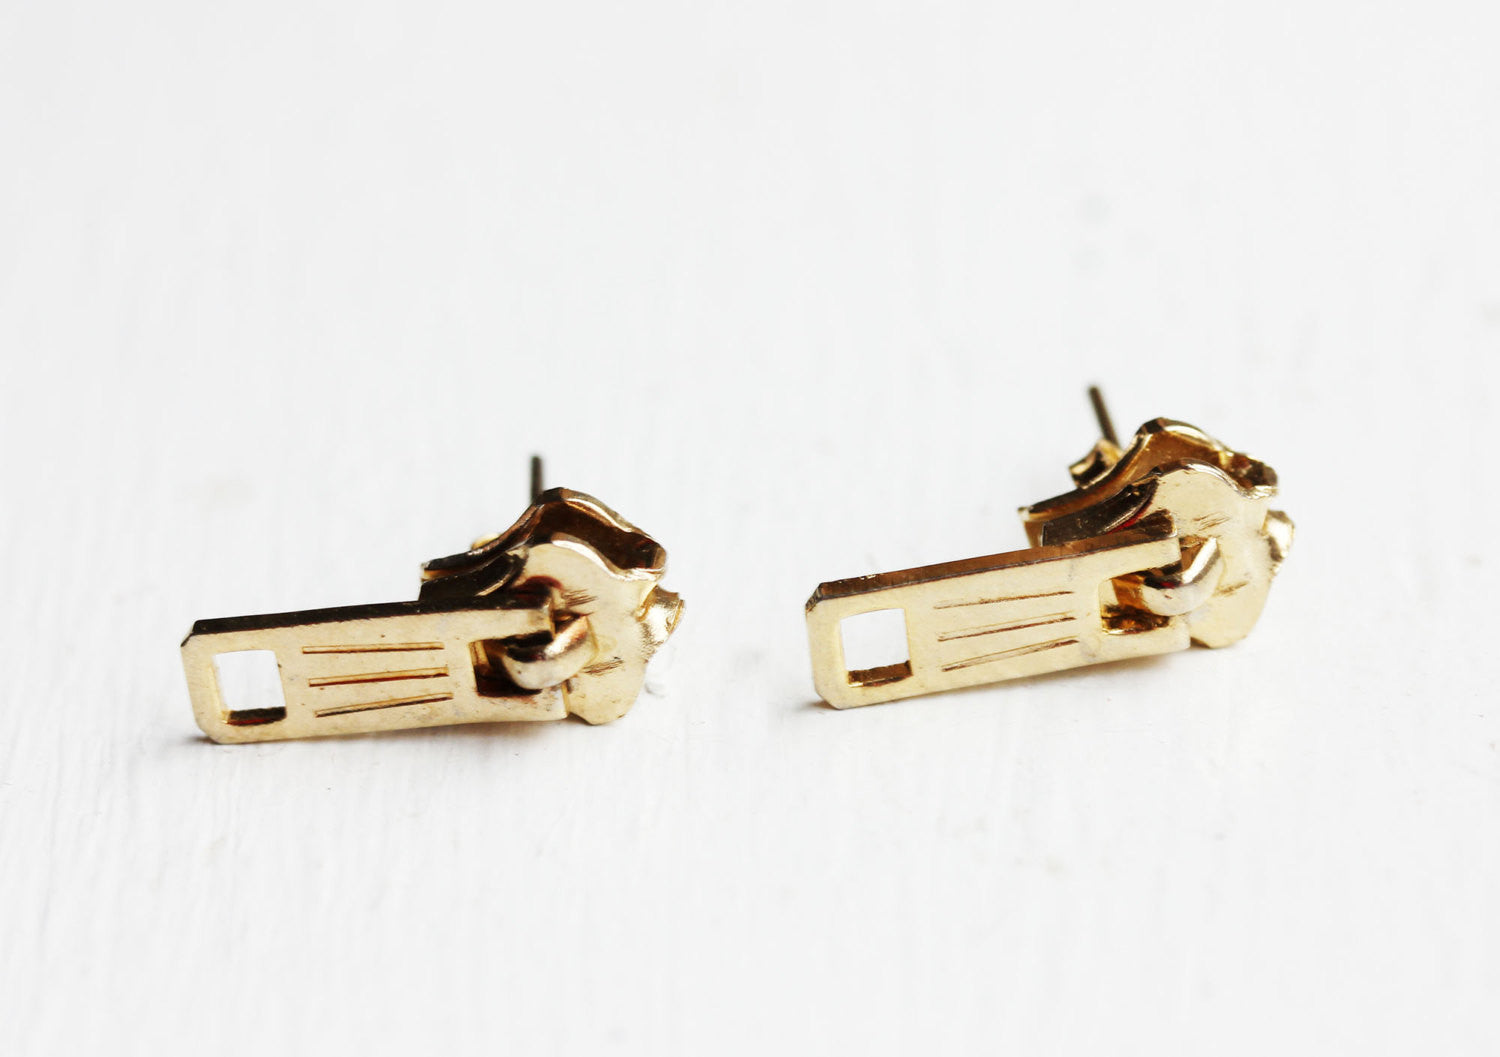 LA3accessories's Earrings Dropshipping Products - FashionGo